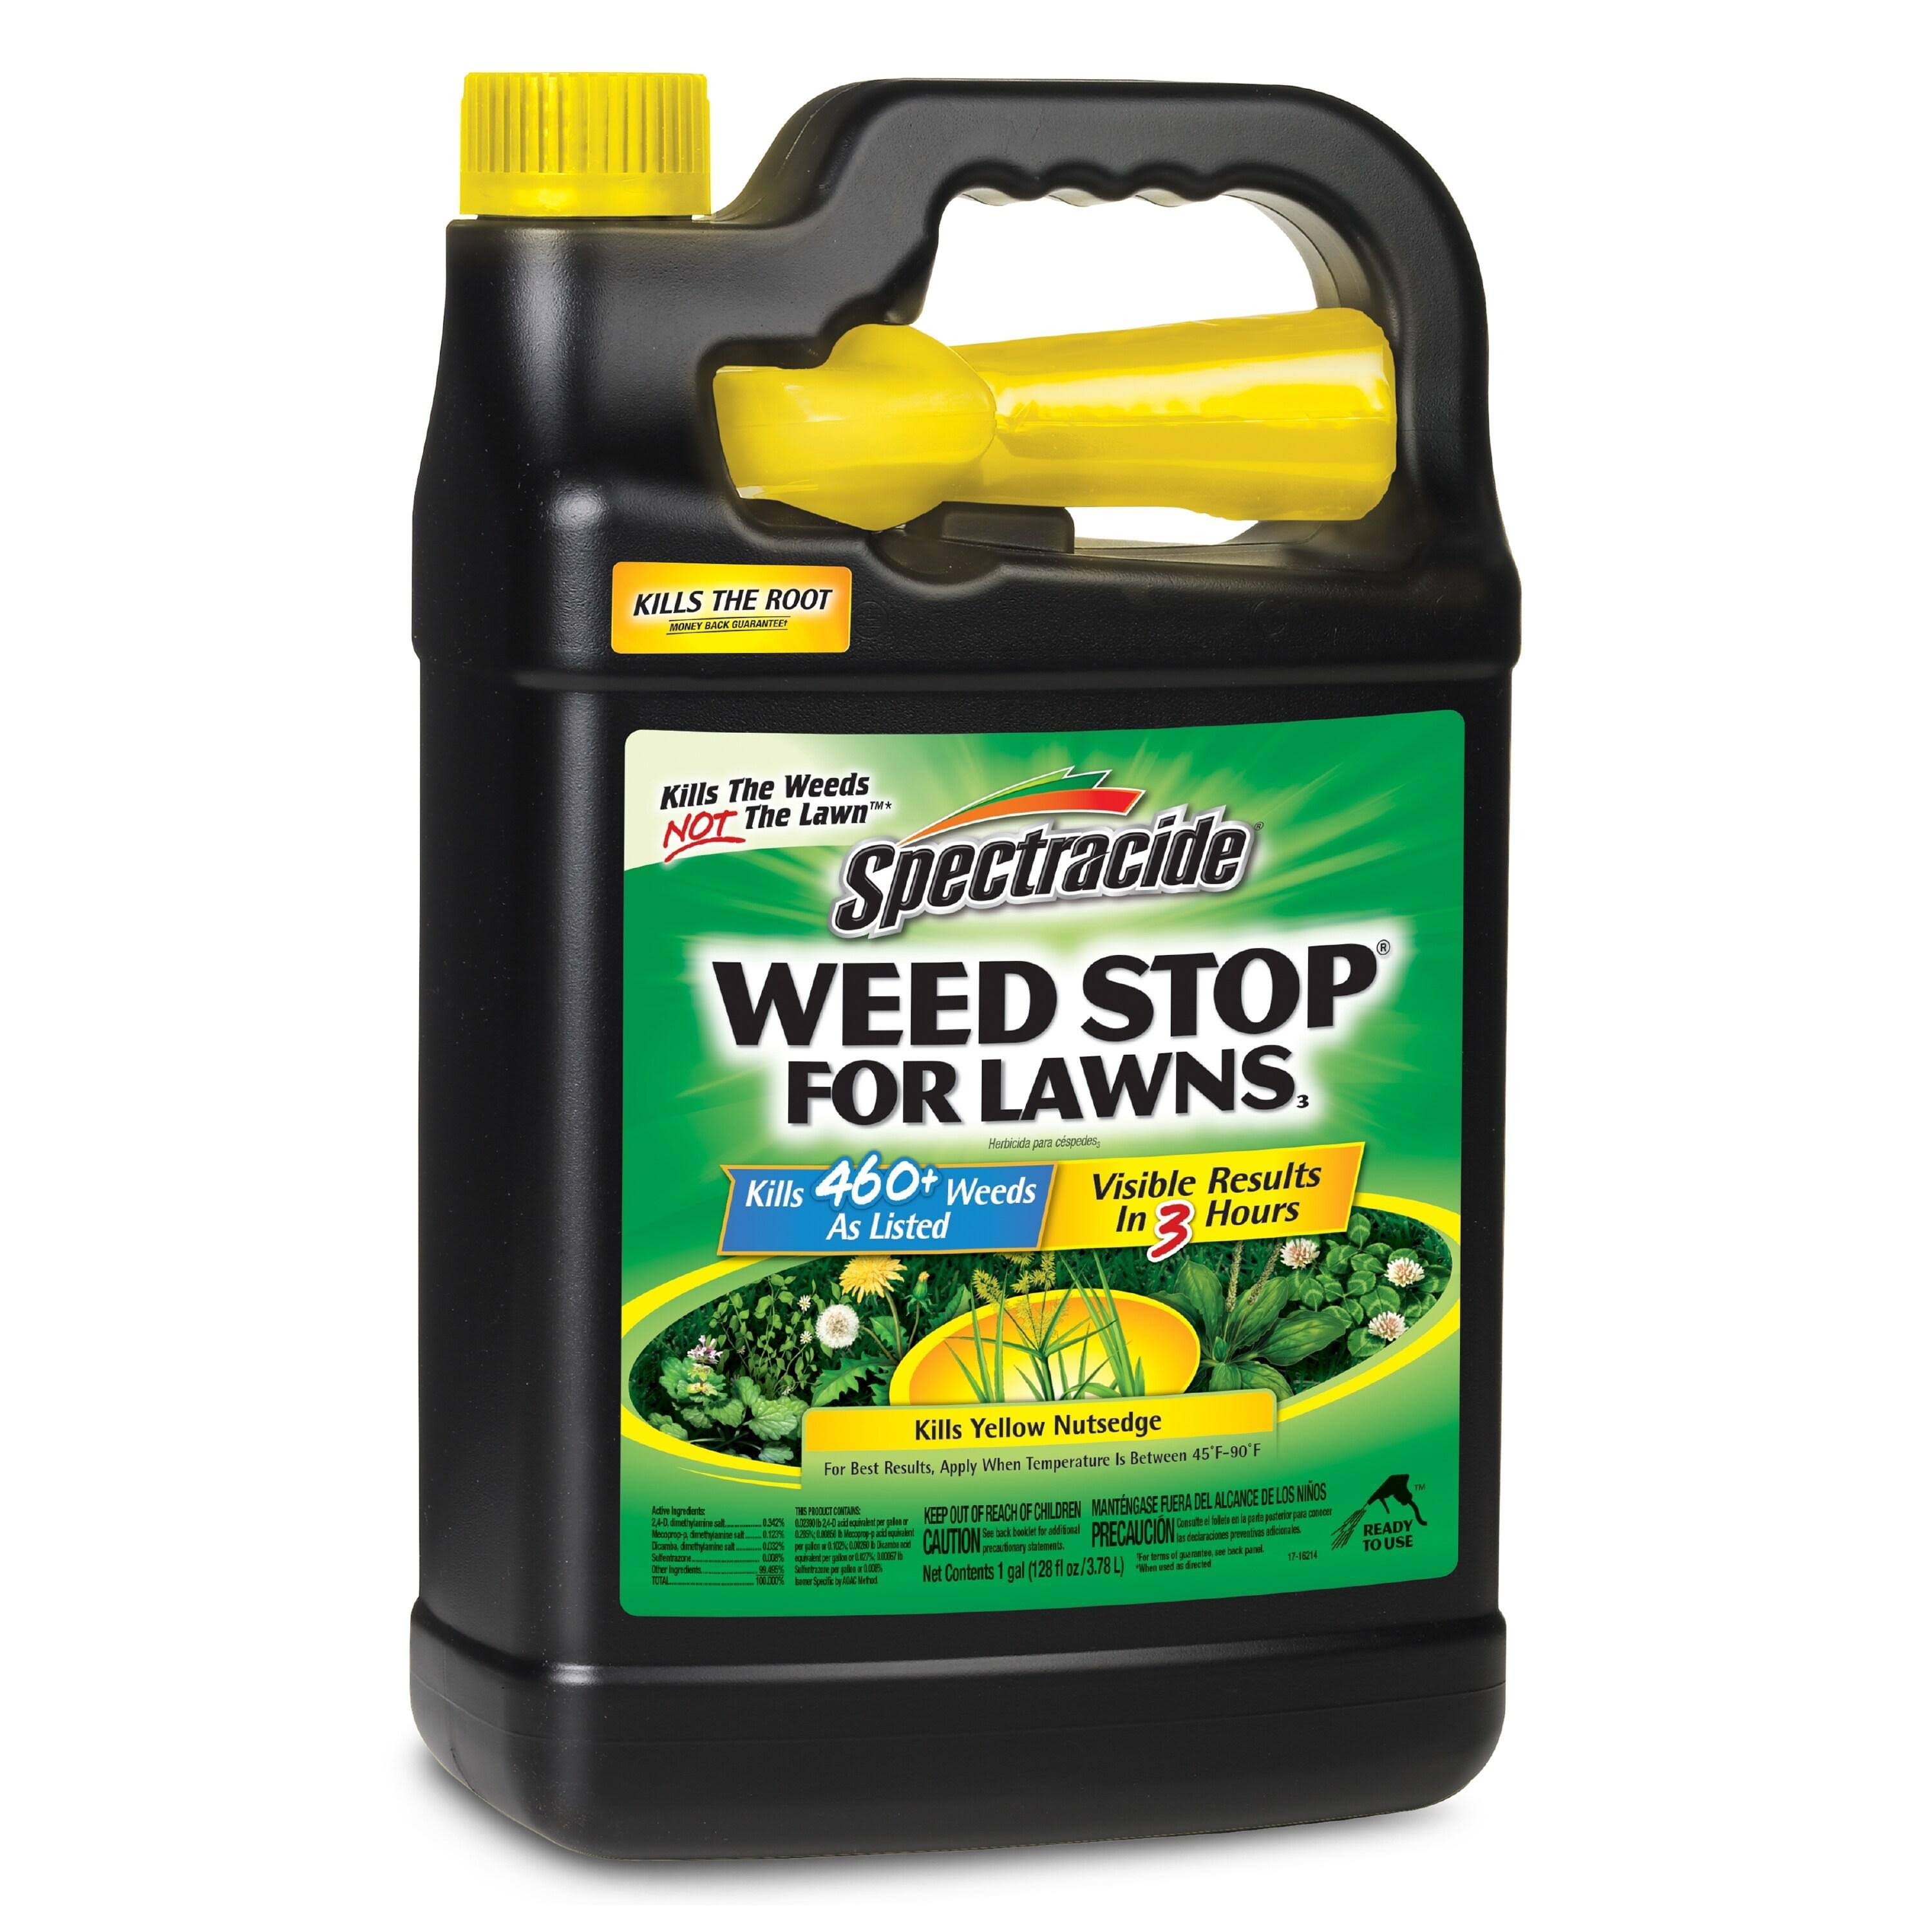 Spectracide Weed Stop, For Lawns - 1 gal, 128 fl oz